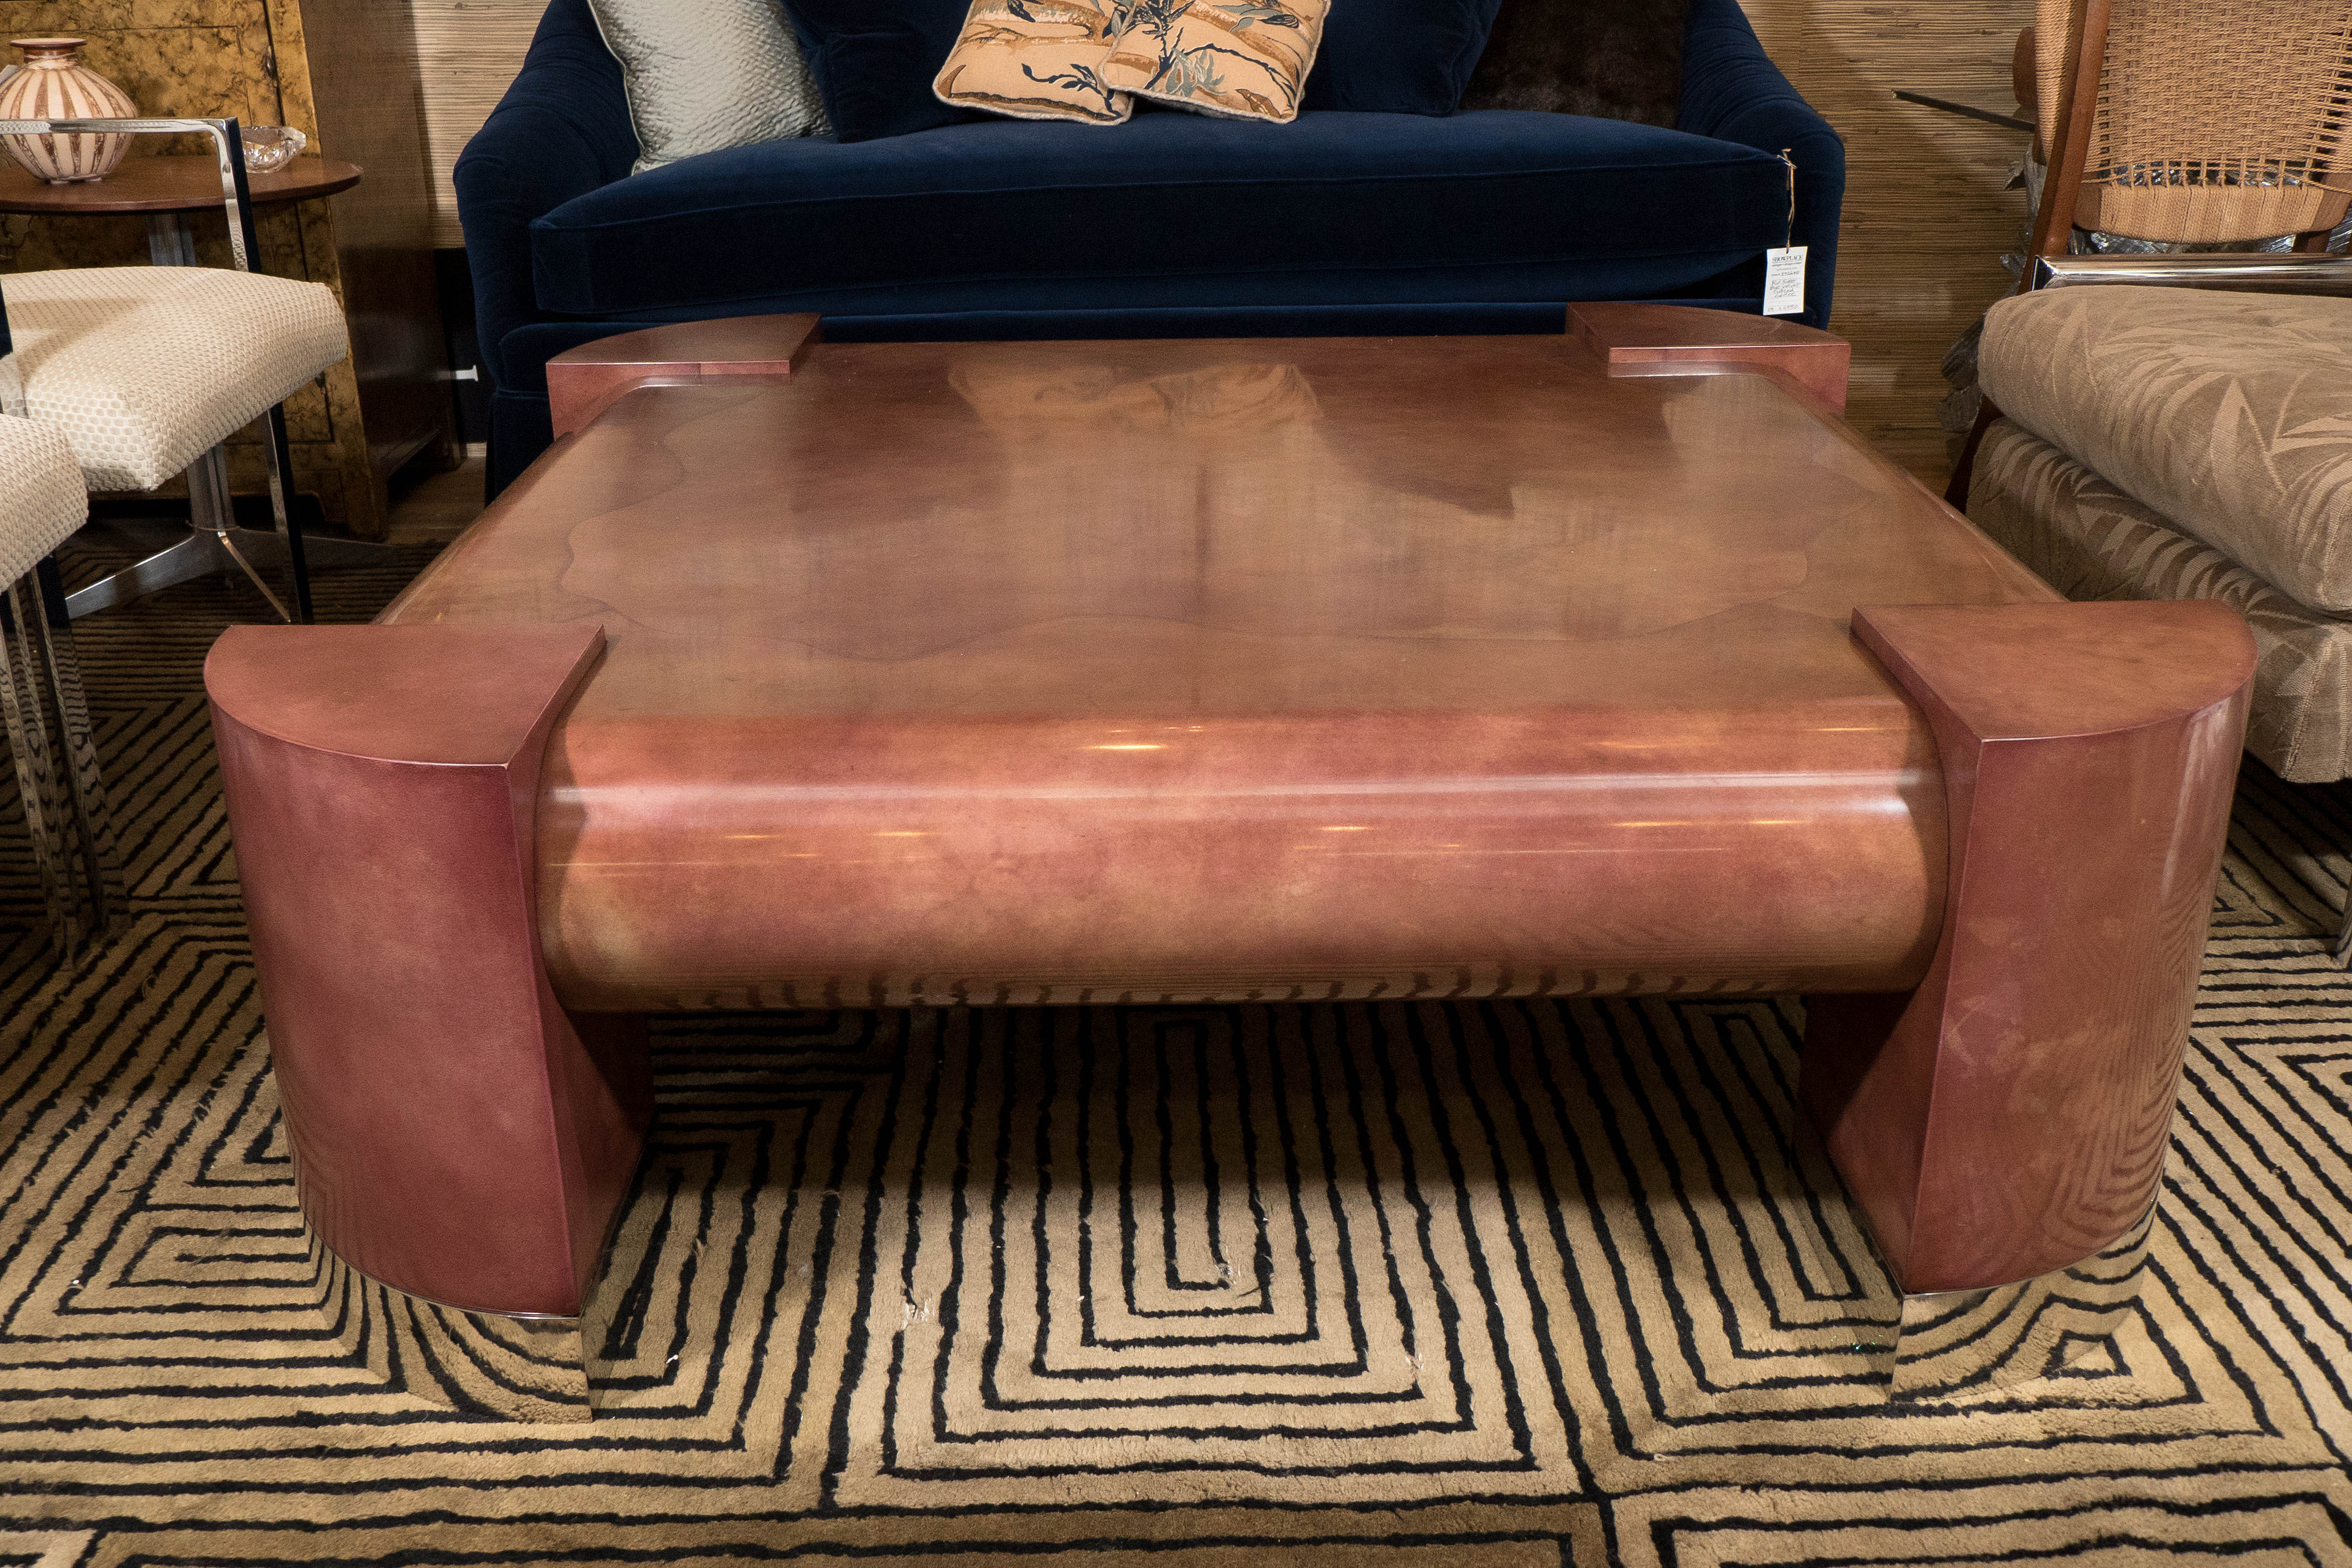 A vintage, highly modernistic coffee table, designed by Lorin Marsh, circa 1970s, in the manner of Karl Springer, in rouge toned lacquered goatskin, on rounded quarter wedge form legs with stainless steel plates. Markings include original label to